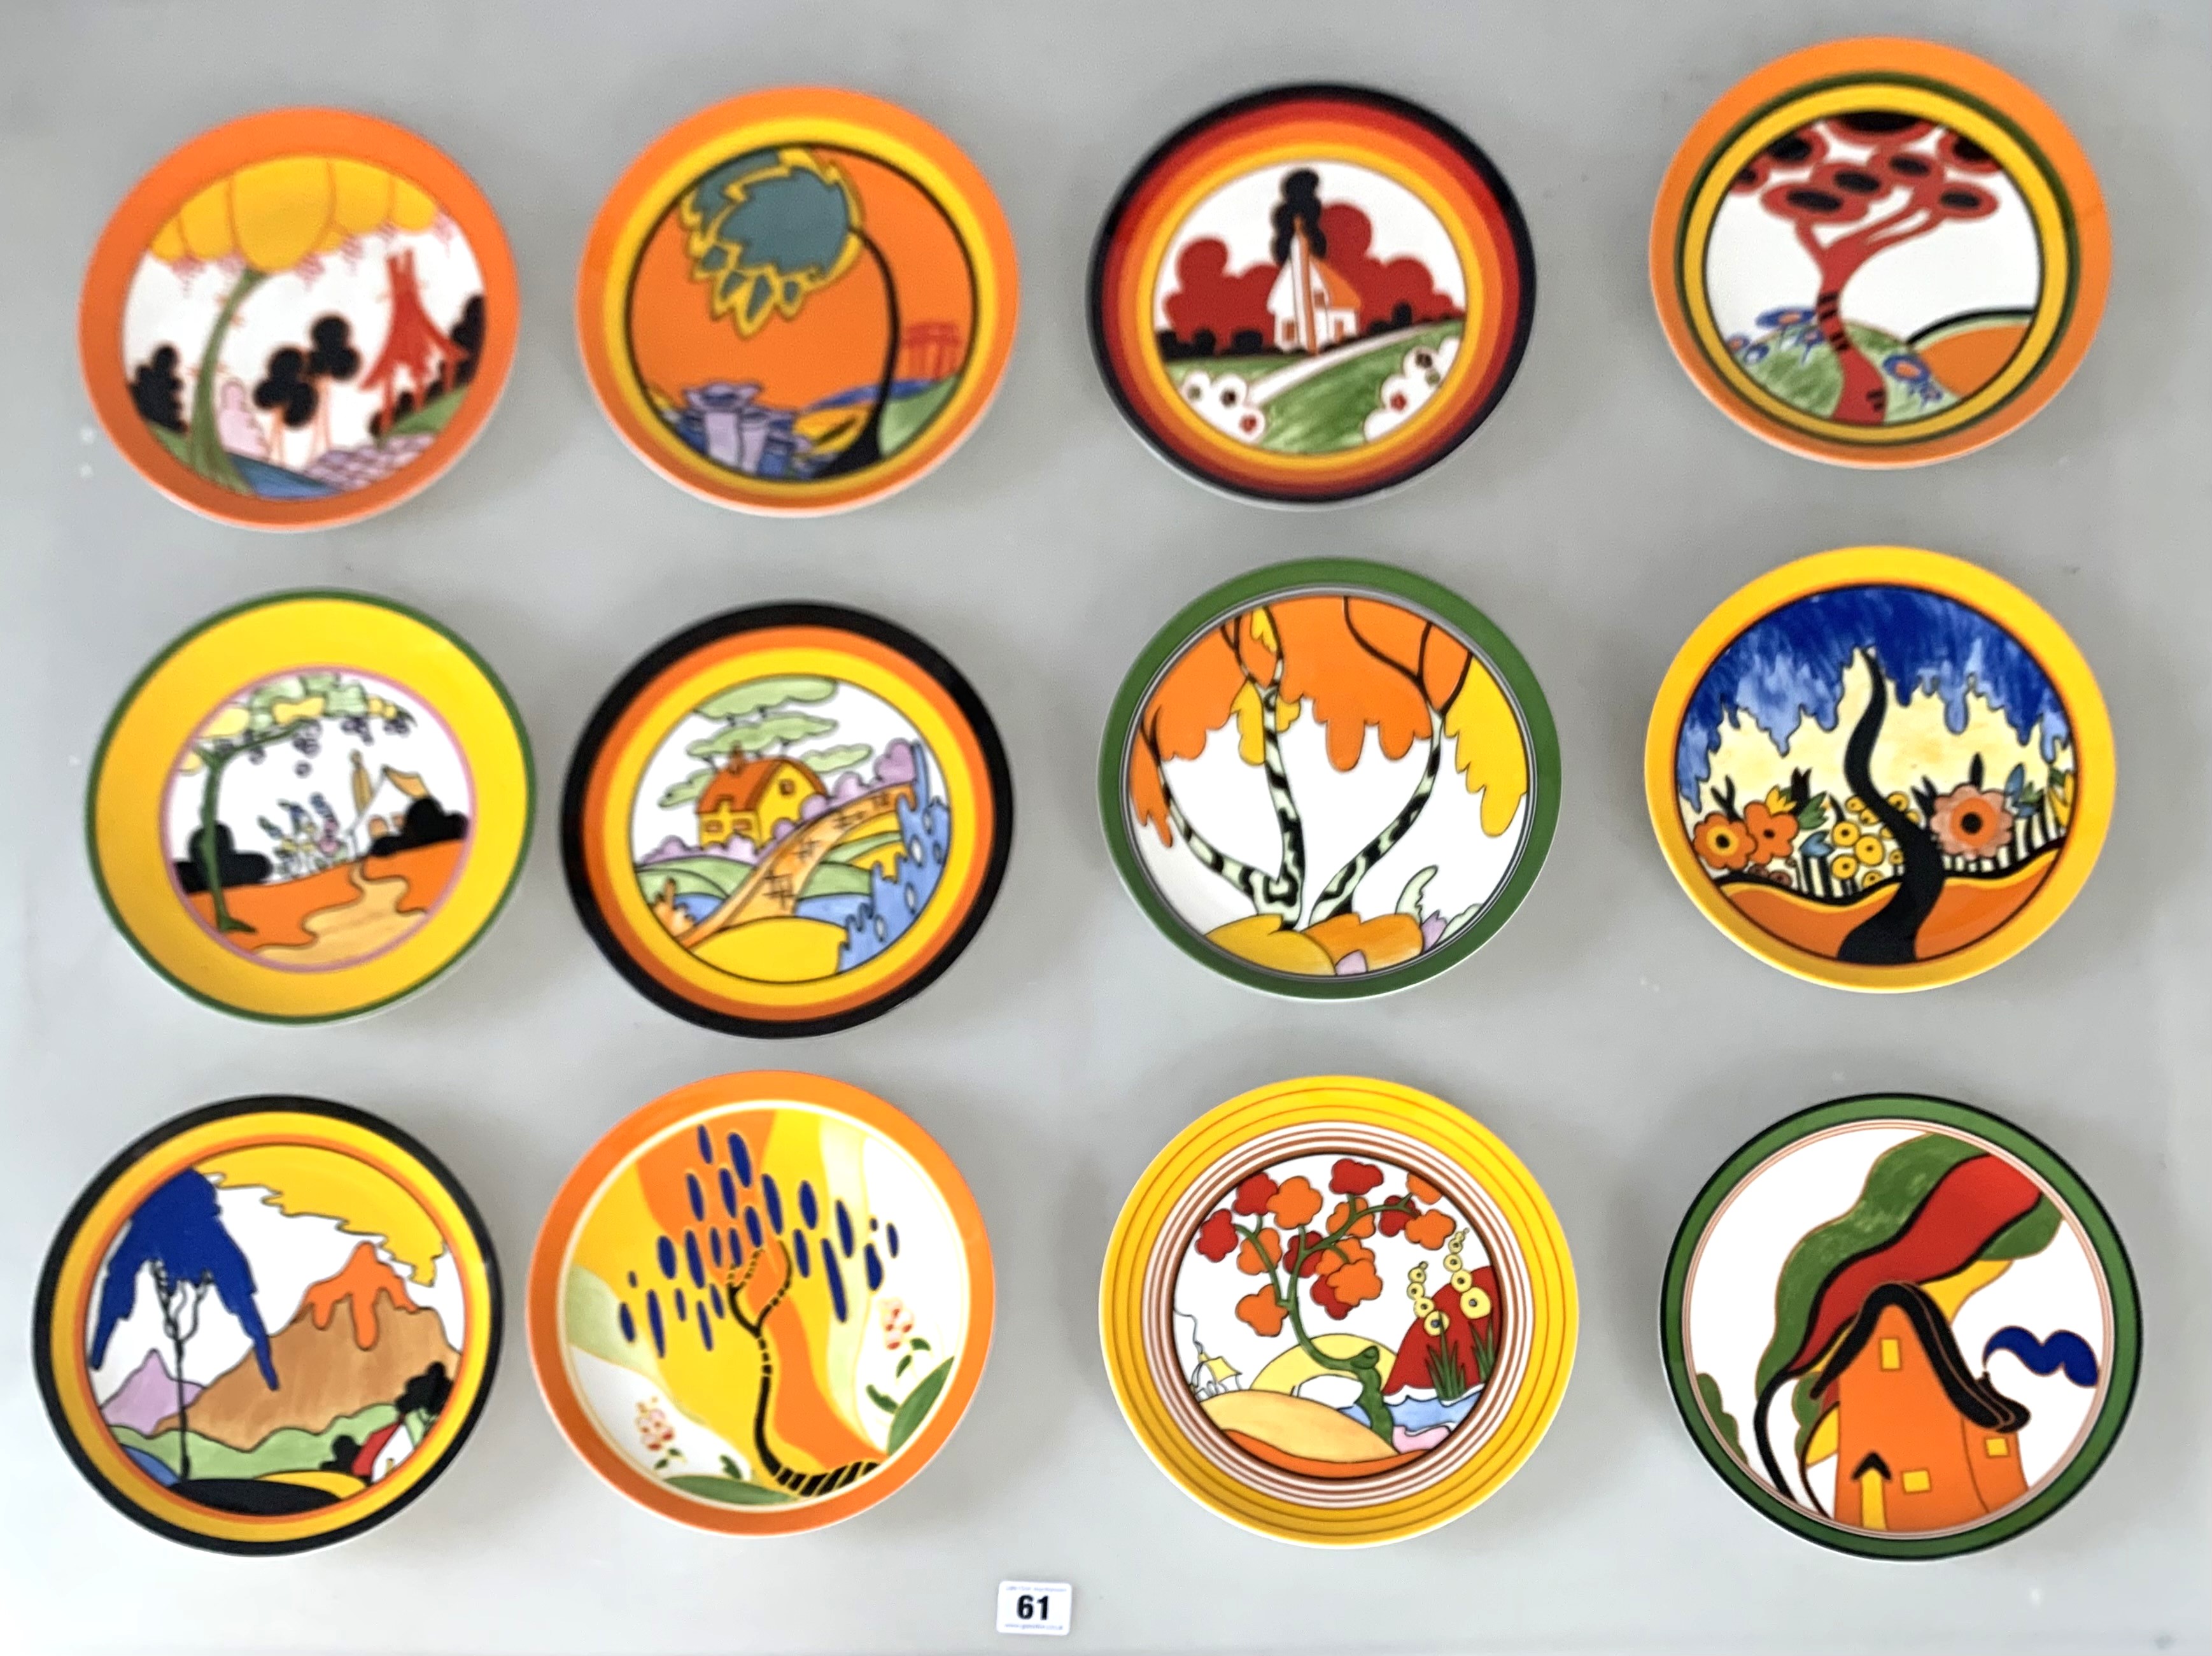 12 Wedgwood Clarice Cliff plates